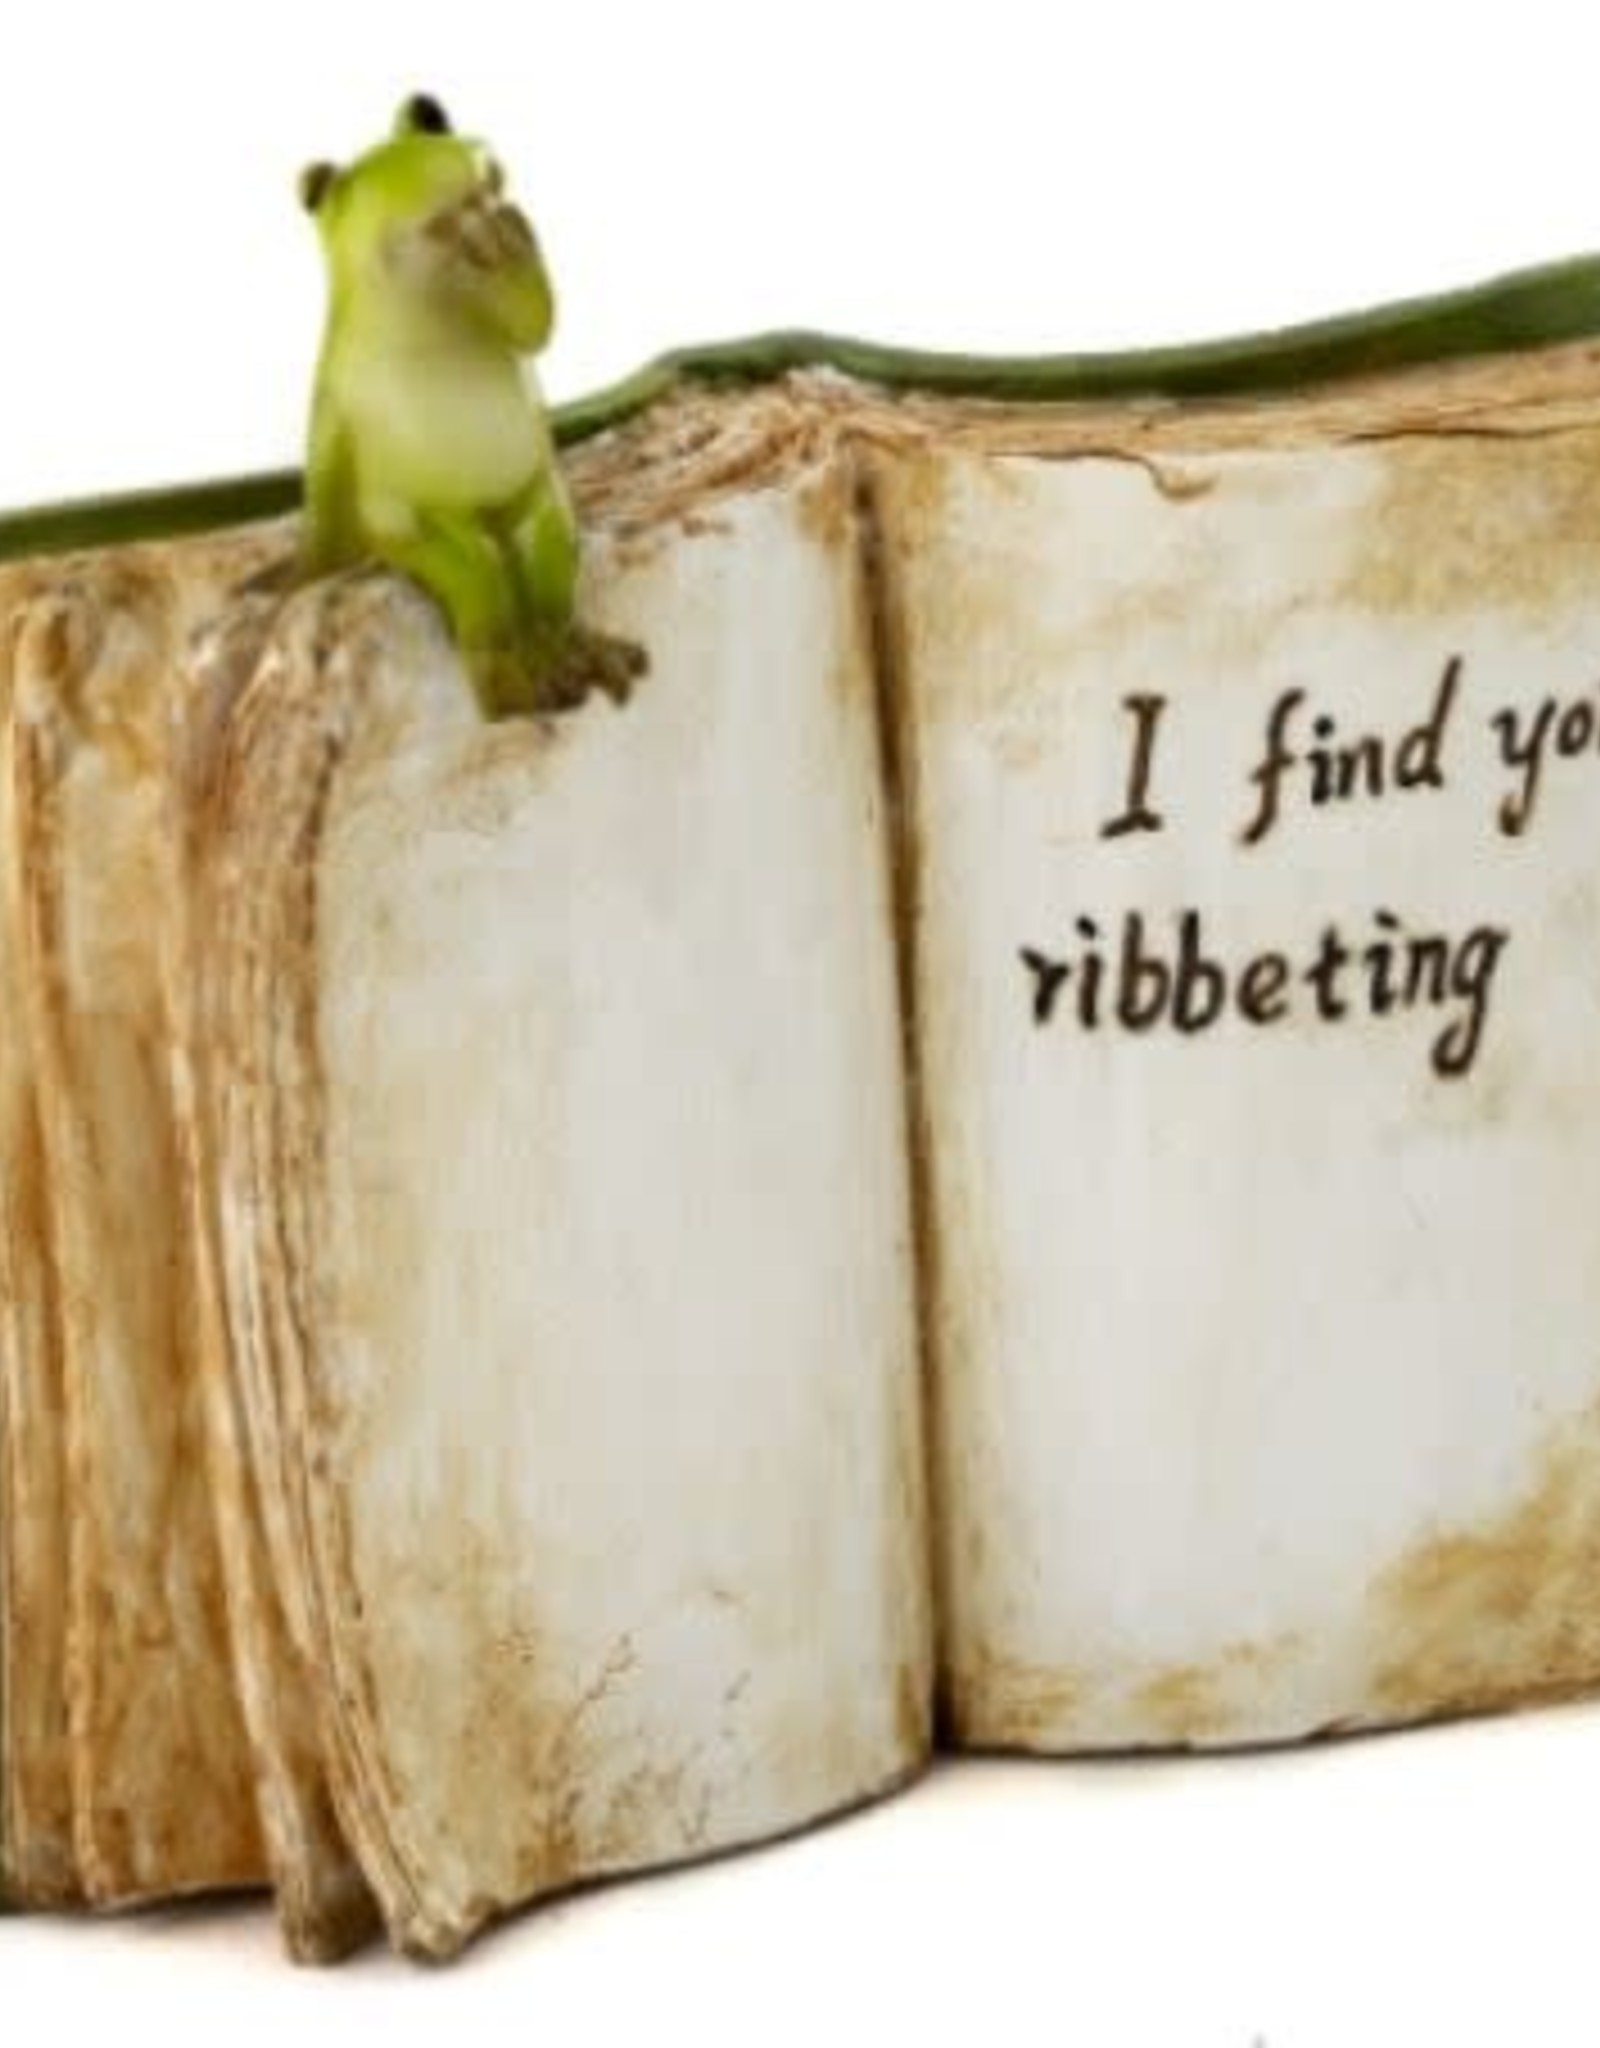 Top Land Trading I FIND YOU RIBBETING BOOK WITH FROG